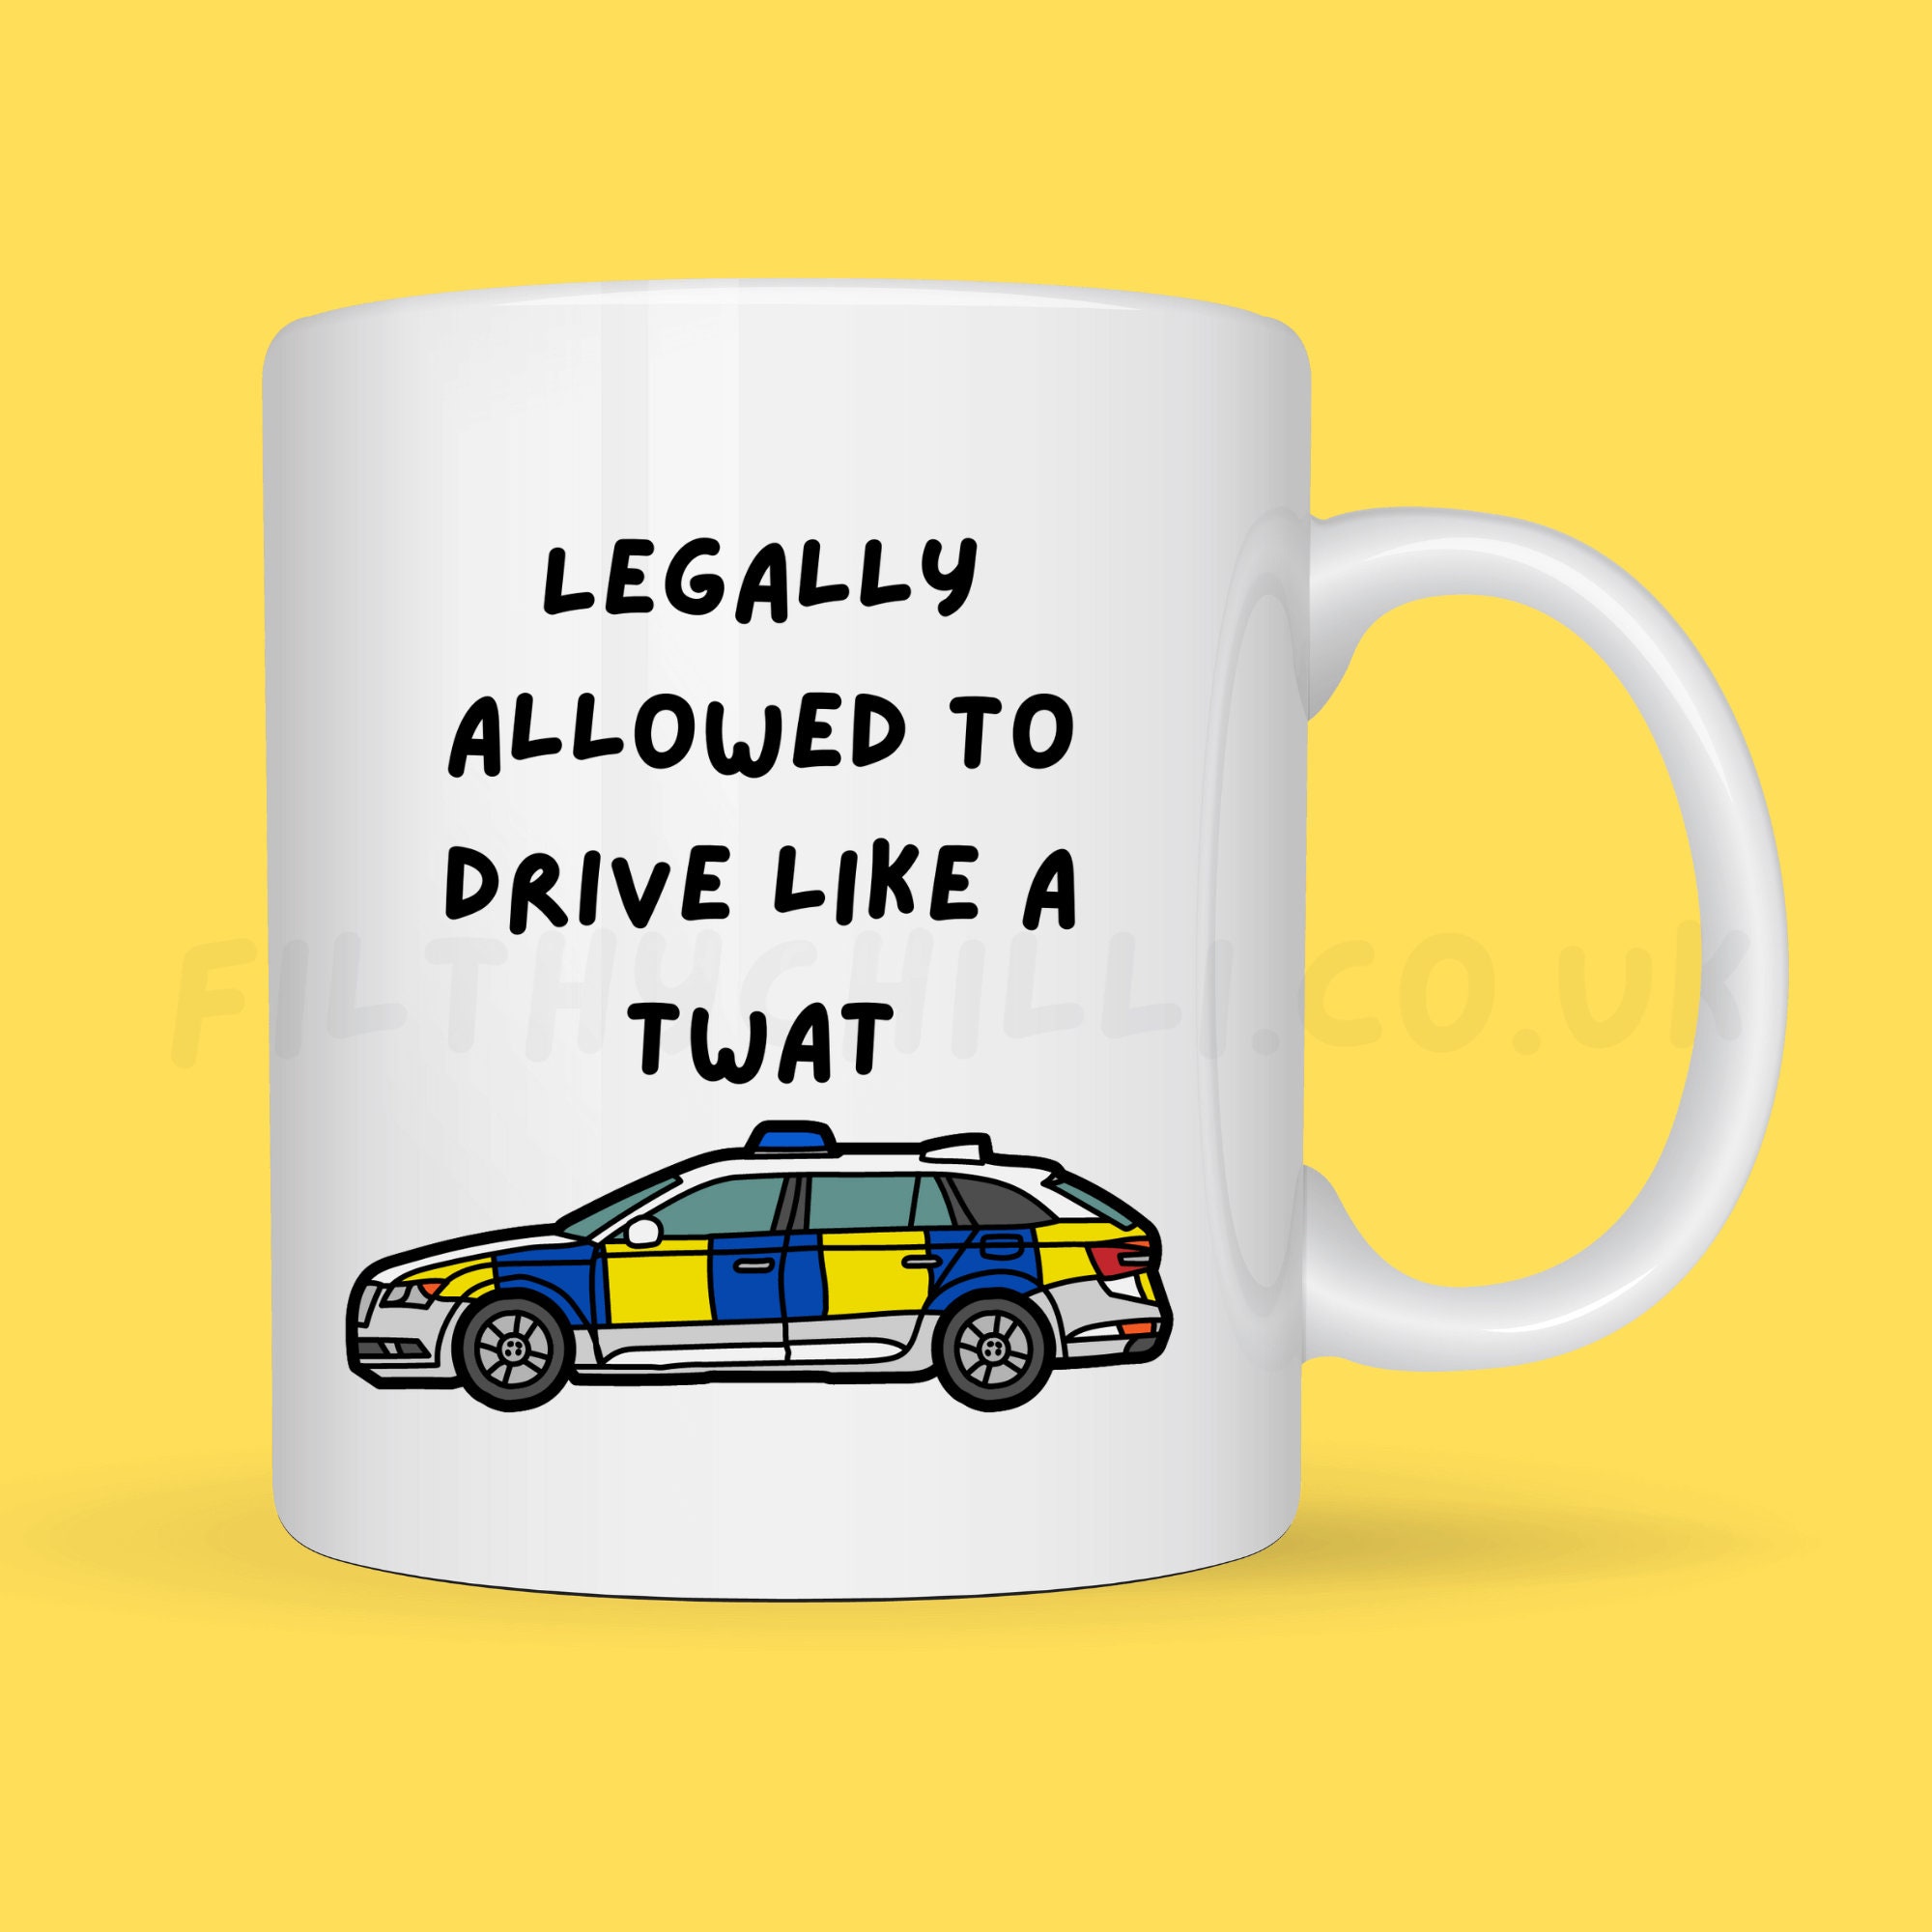 ThisWear Cop Gifts Destiny to Become a Girl Police Officer Gag 11 ounce 2  Pack Coffee Mugs 